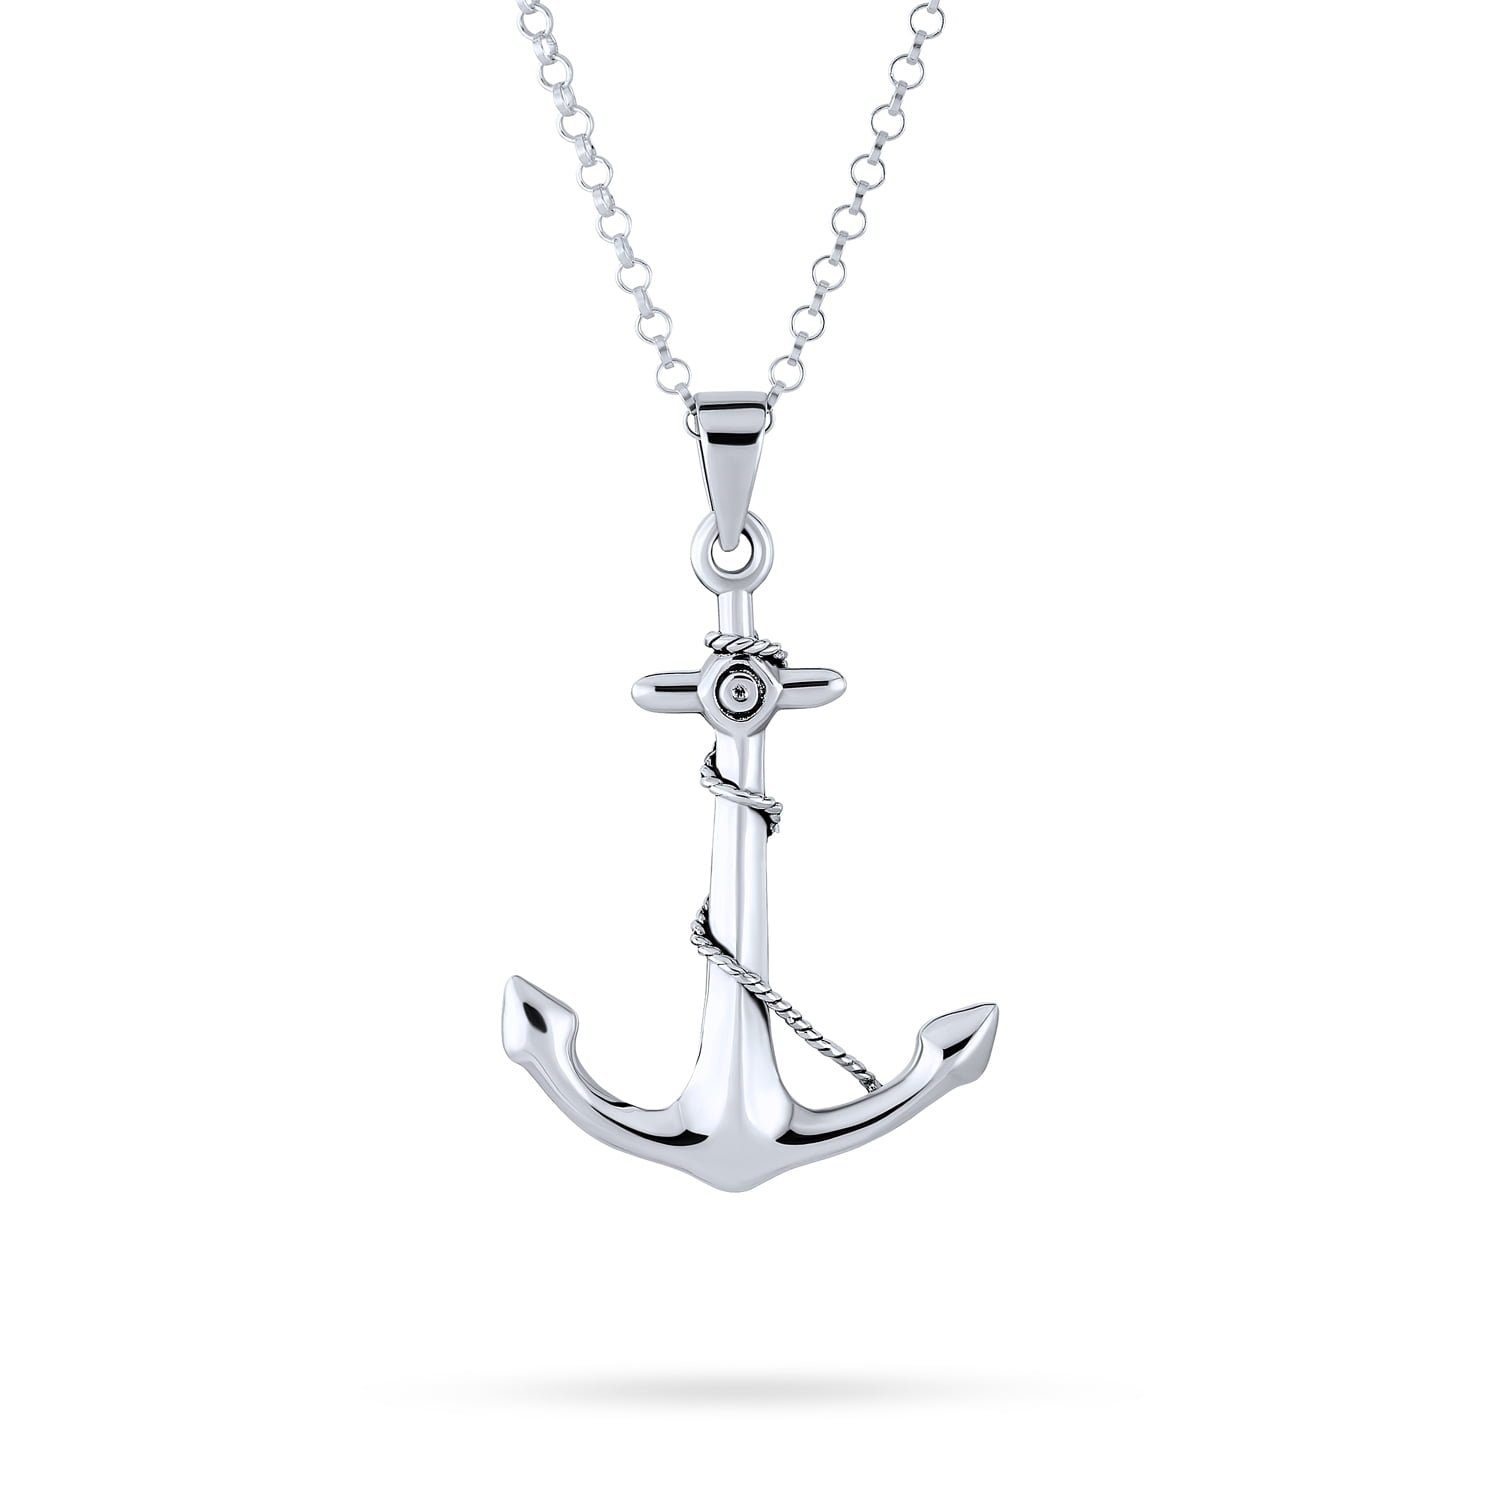 Beautiful Sterling silver 925 sterling Sterling Silver Anchor Charm 